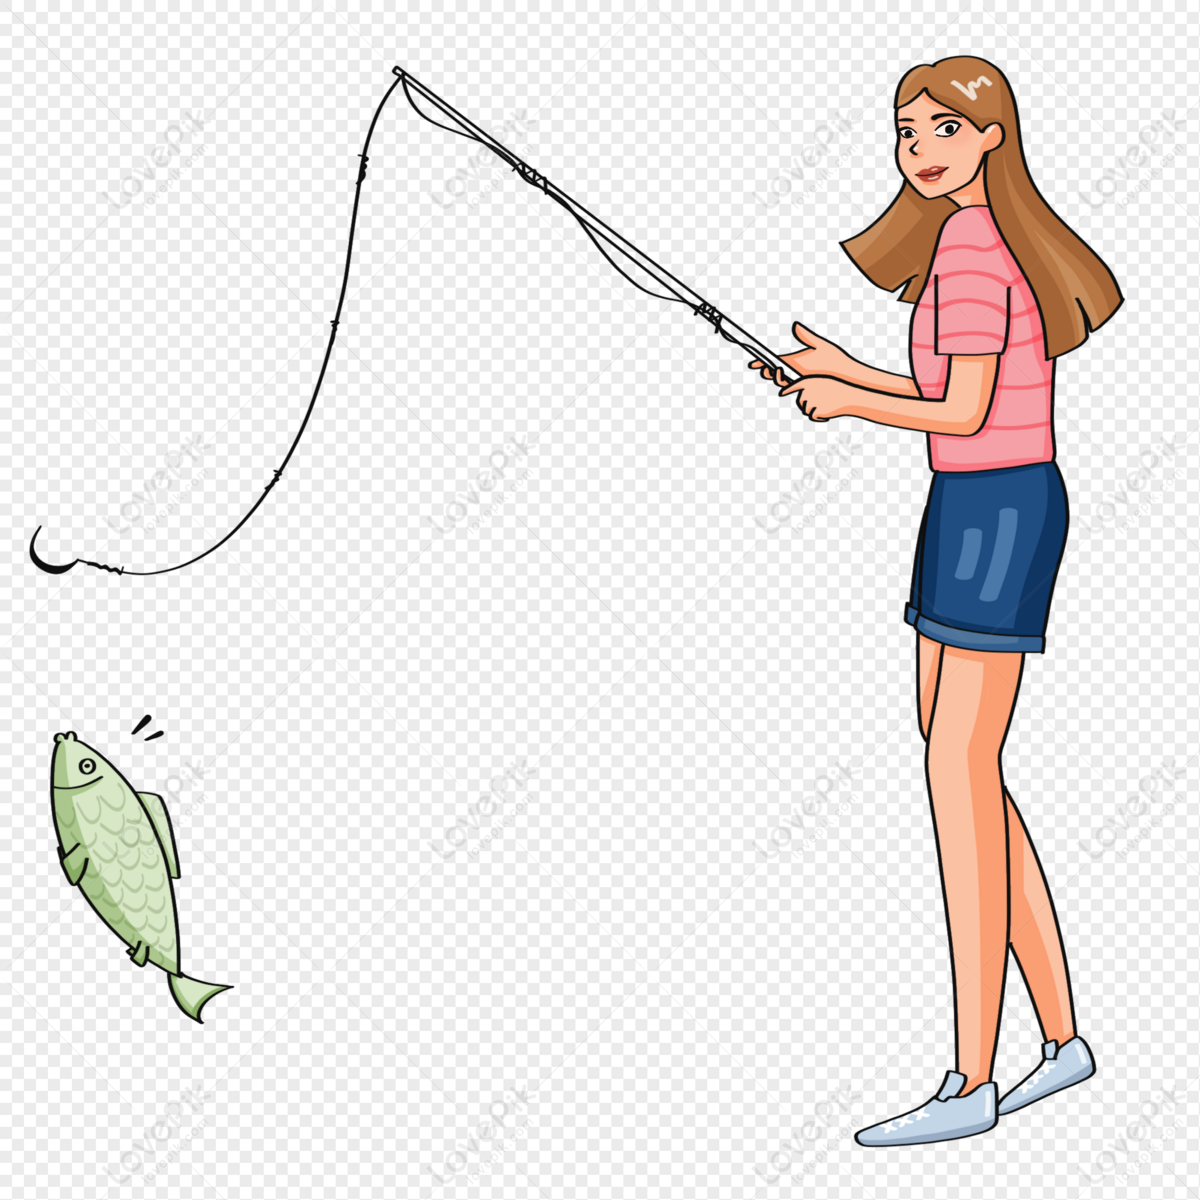 Hand Drawn Woman Fishing Character Image, Fishing Girl, Fishing Rod, Fish  PNG Transparent Background And Clipart Image For Free Download - Lovepik